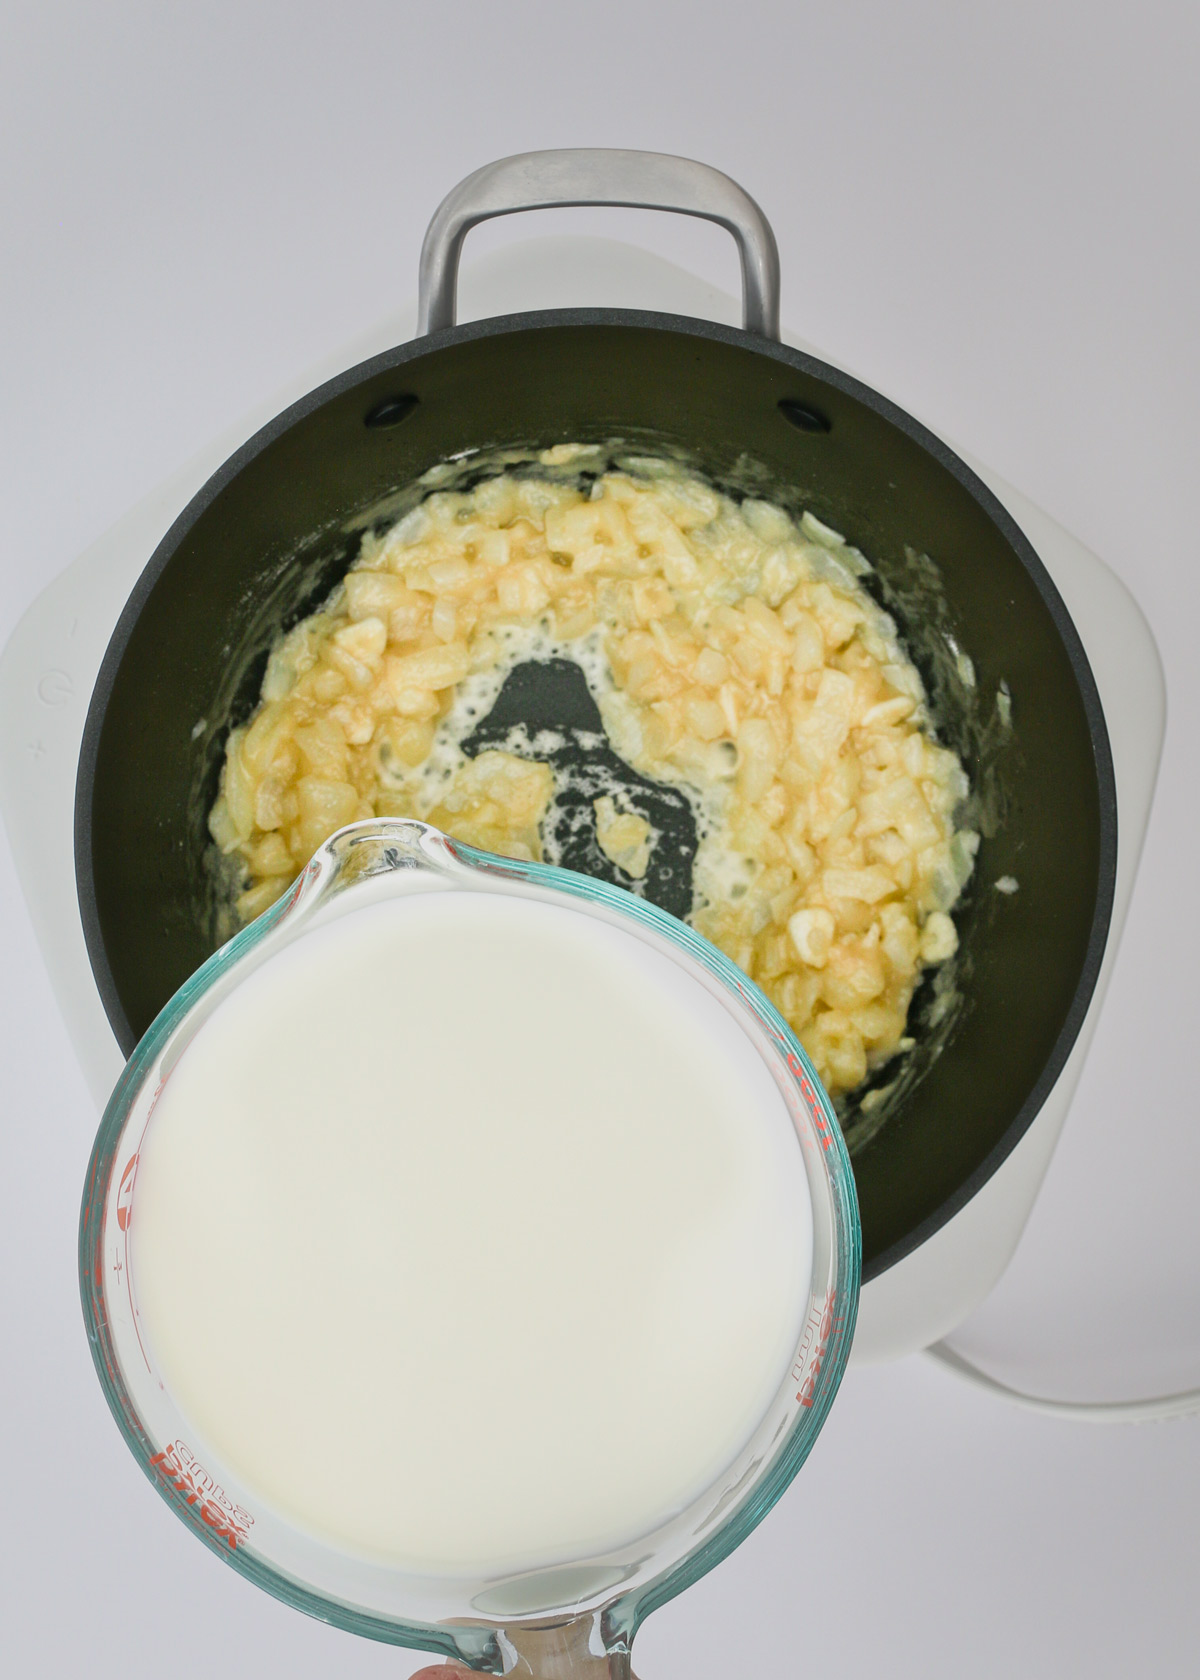 adding milk to make a sauce in the pot.